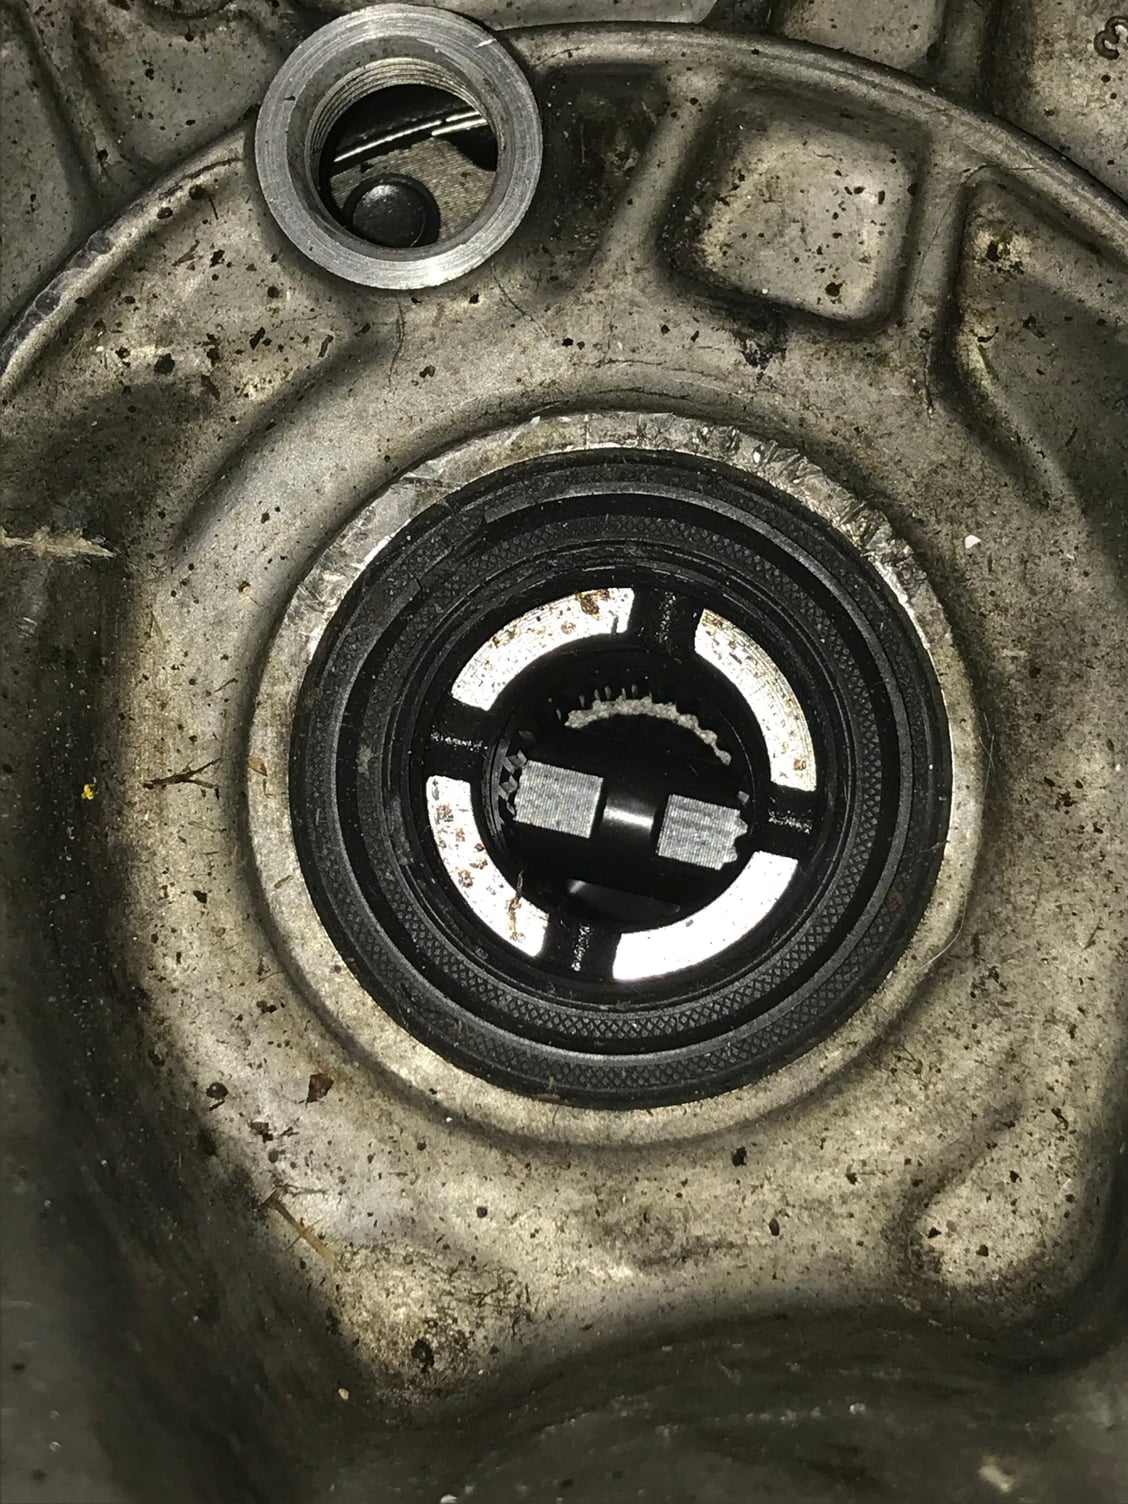 honda continuously variable transmission problems